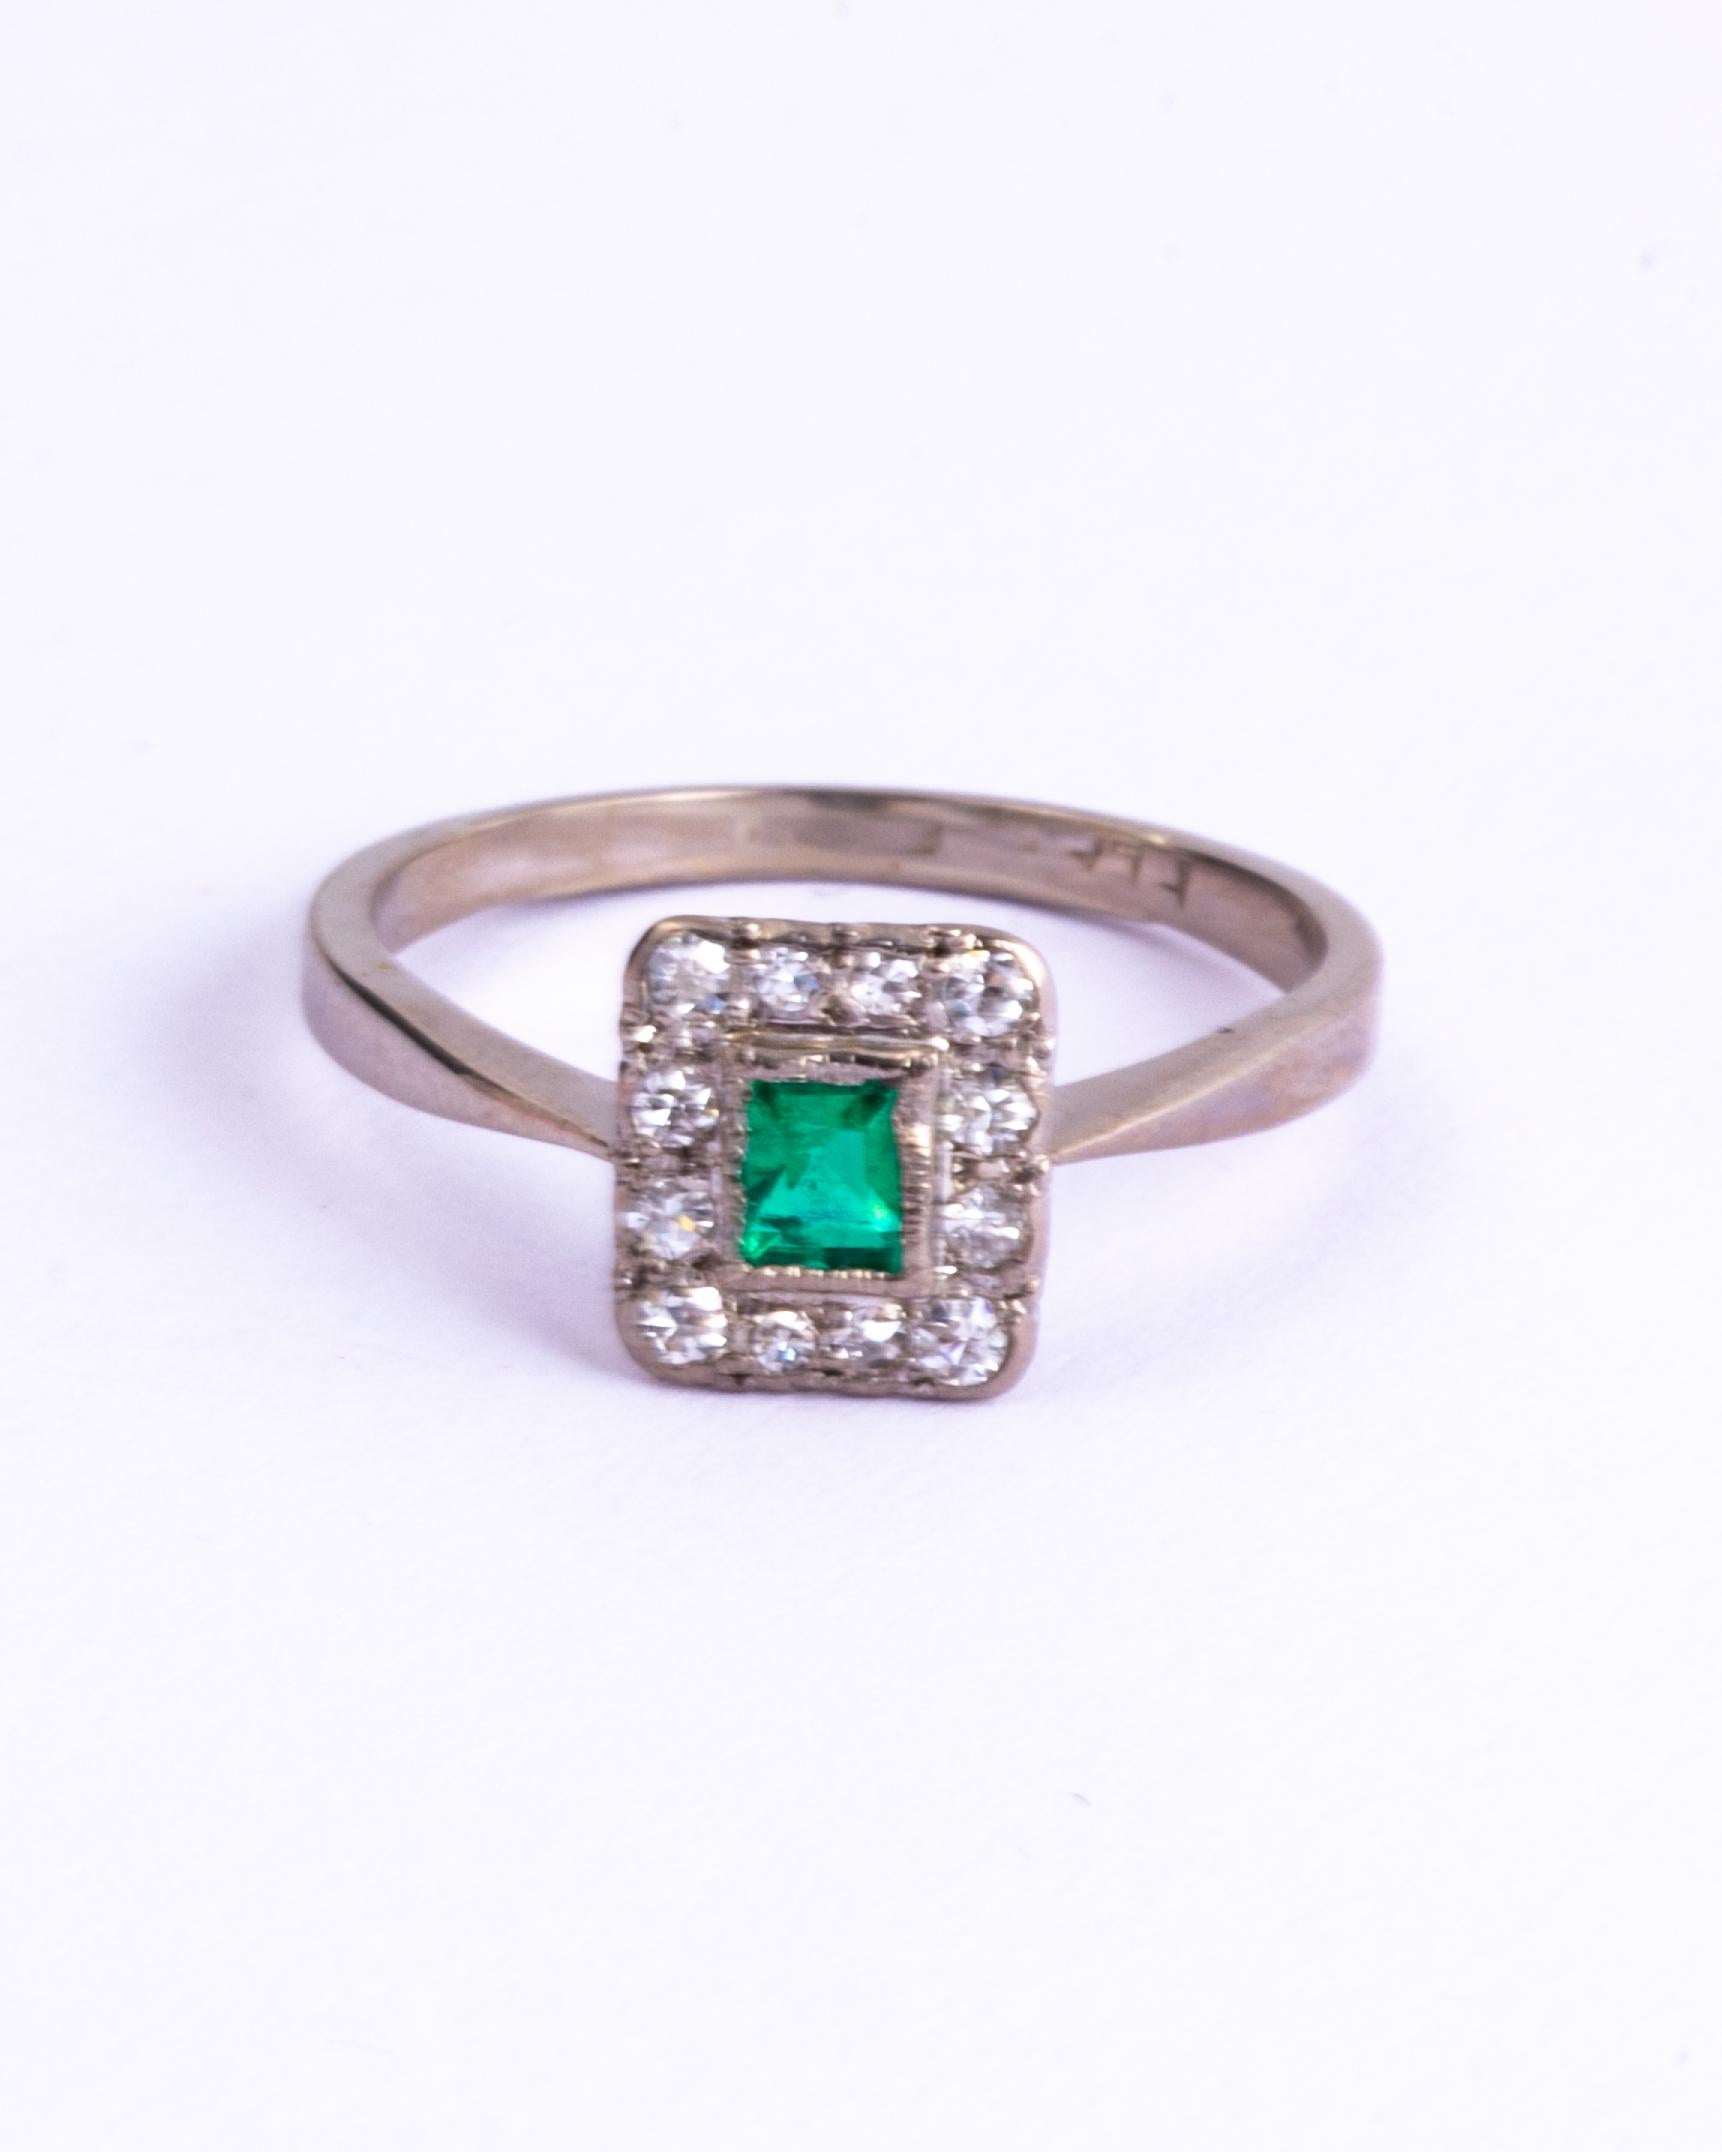 A superb antique Art Deco panel ring centrally set with a classic emerald-cut green emerald. The emerald is bordered by twelve beautiful old European cut white diamonds totalling aprox 25pts. The stones are set in platinum to complement their